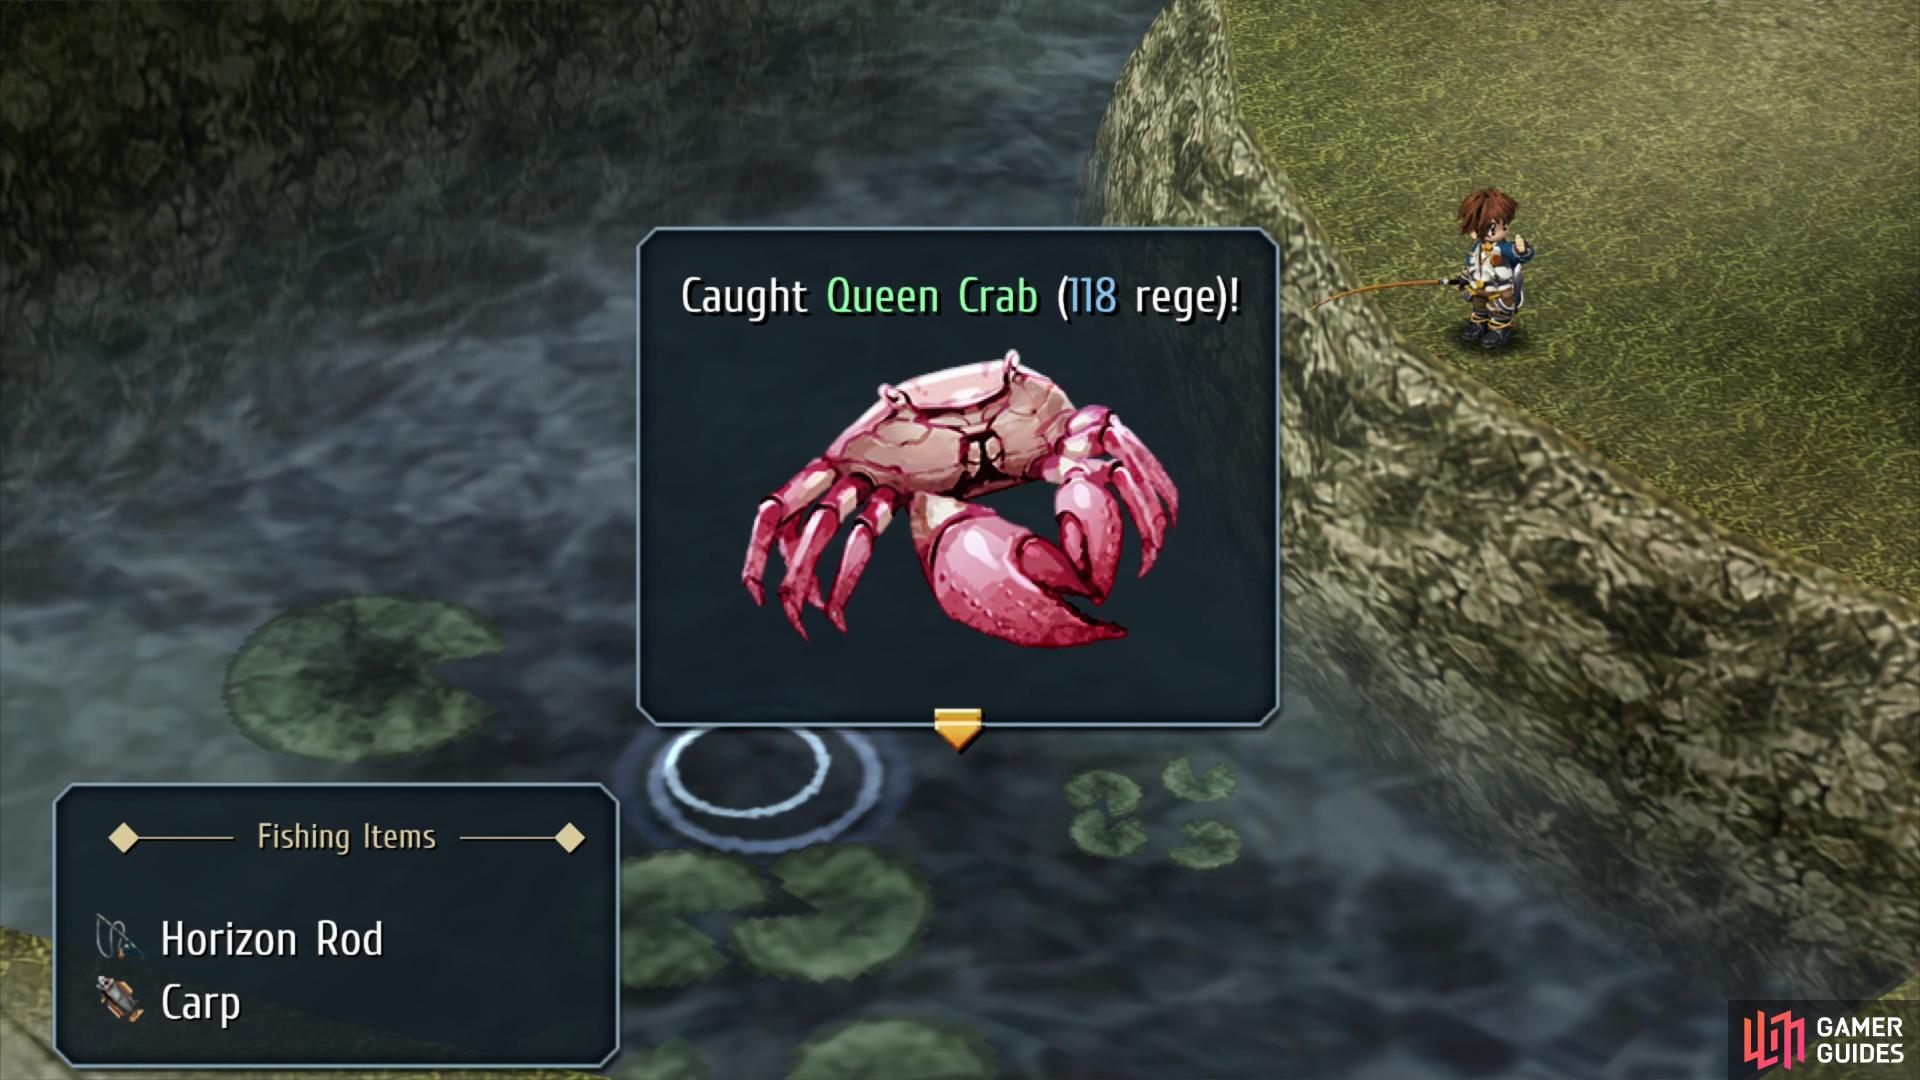 Pull the Queen Crab out of the Ancient Battlefield - Pond fishing spot.